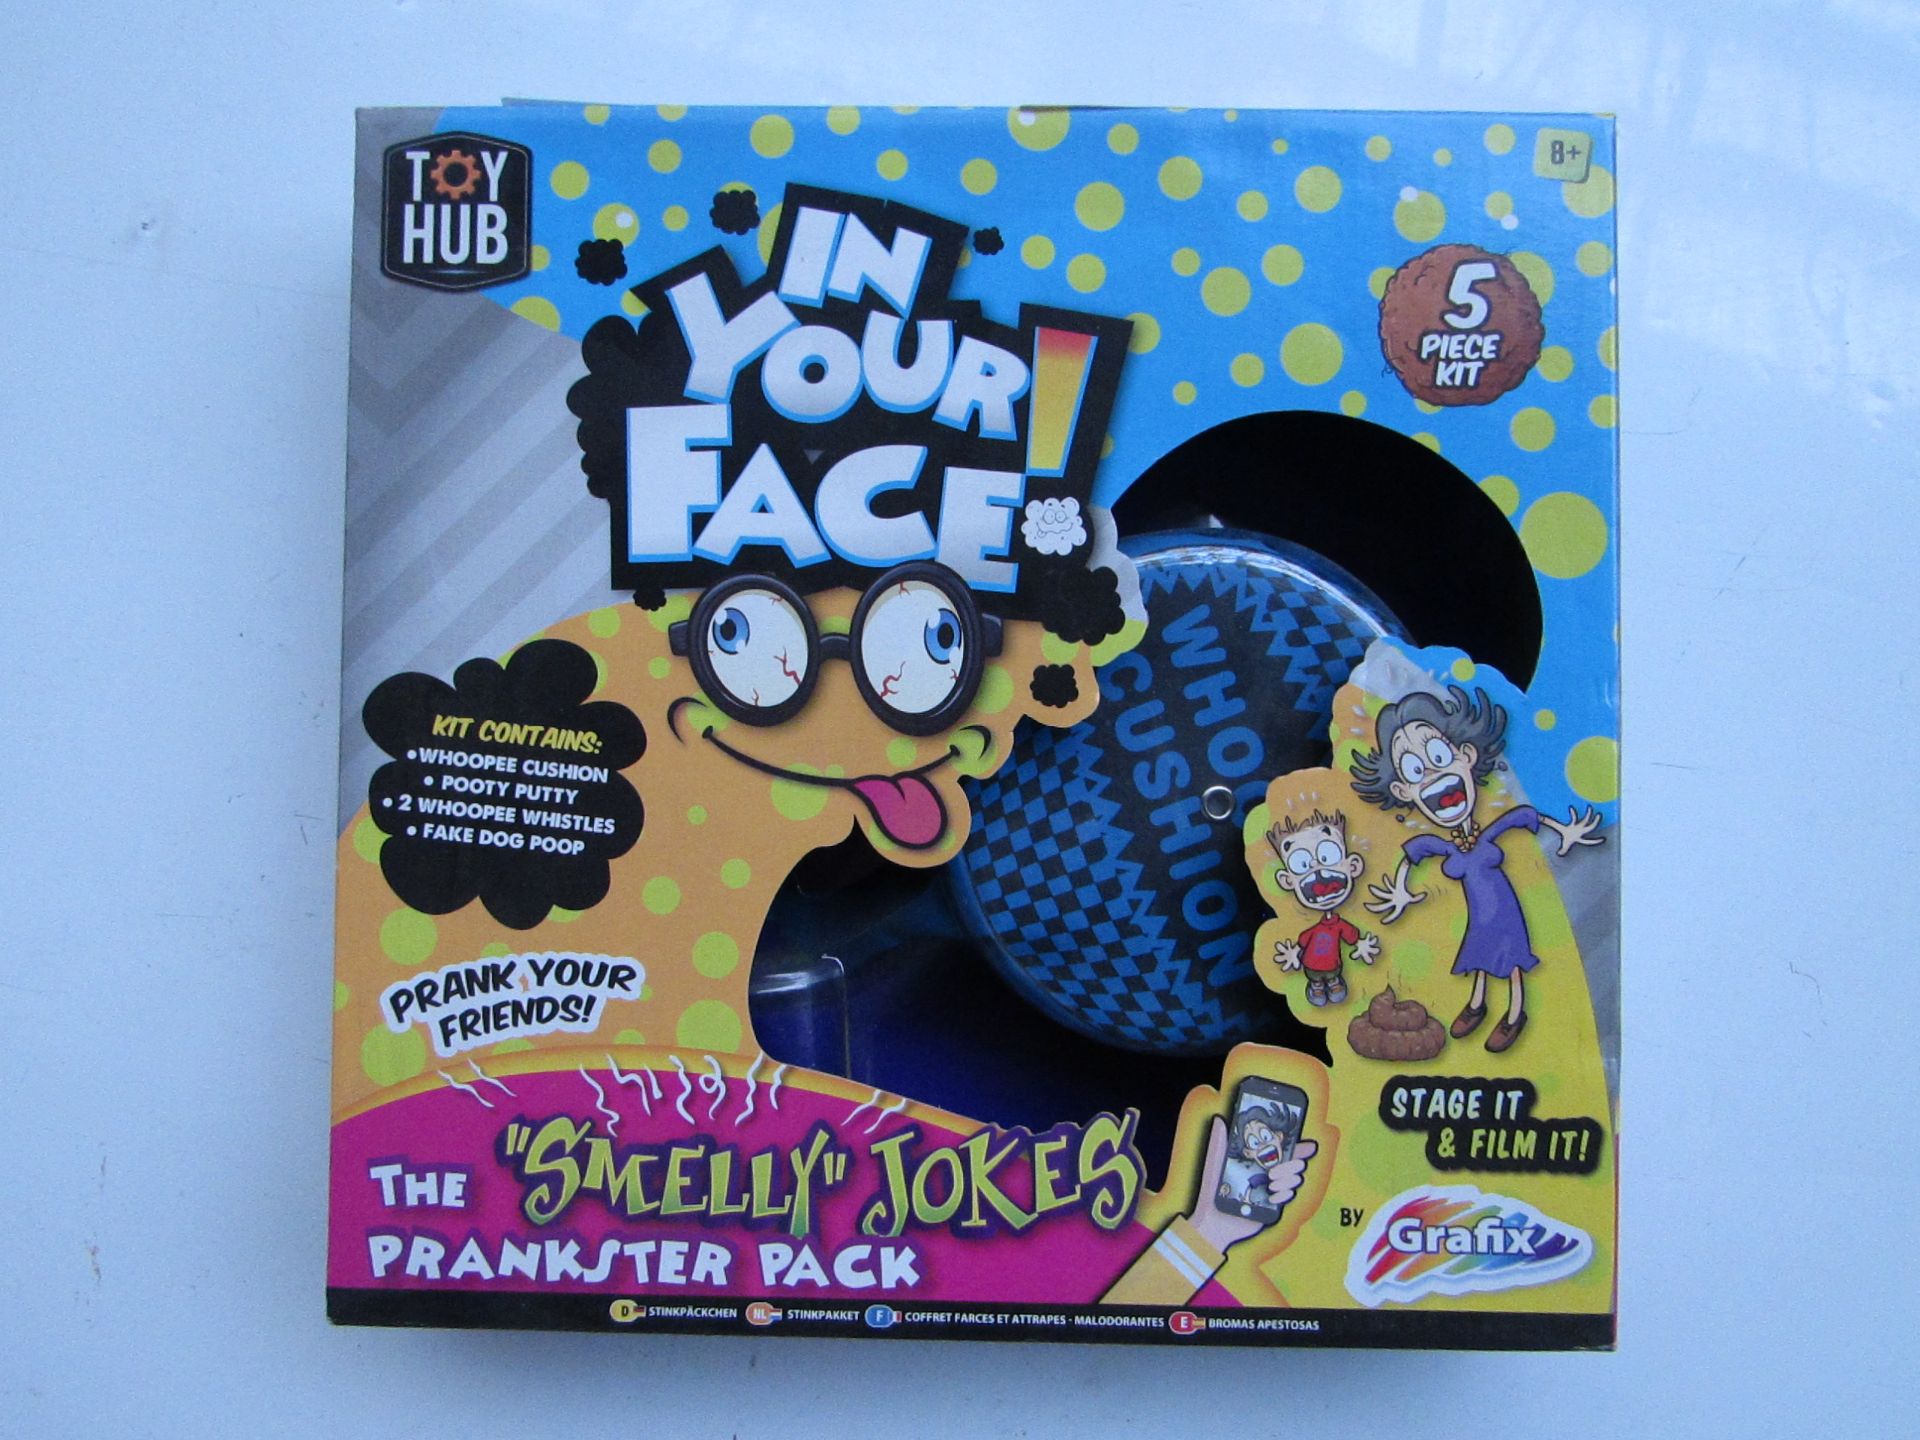 Grafix in your face/1 smelly jokes prankster pack new and boxed.